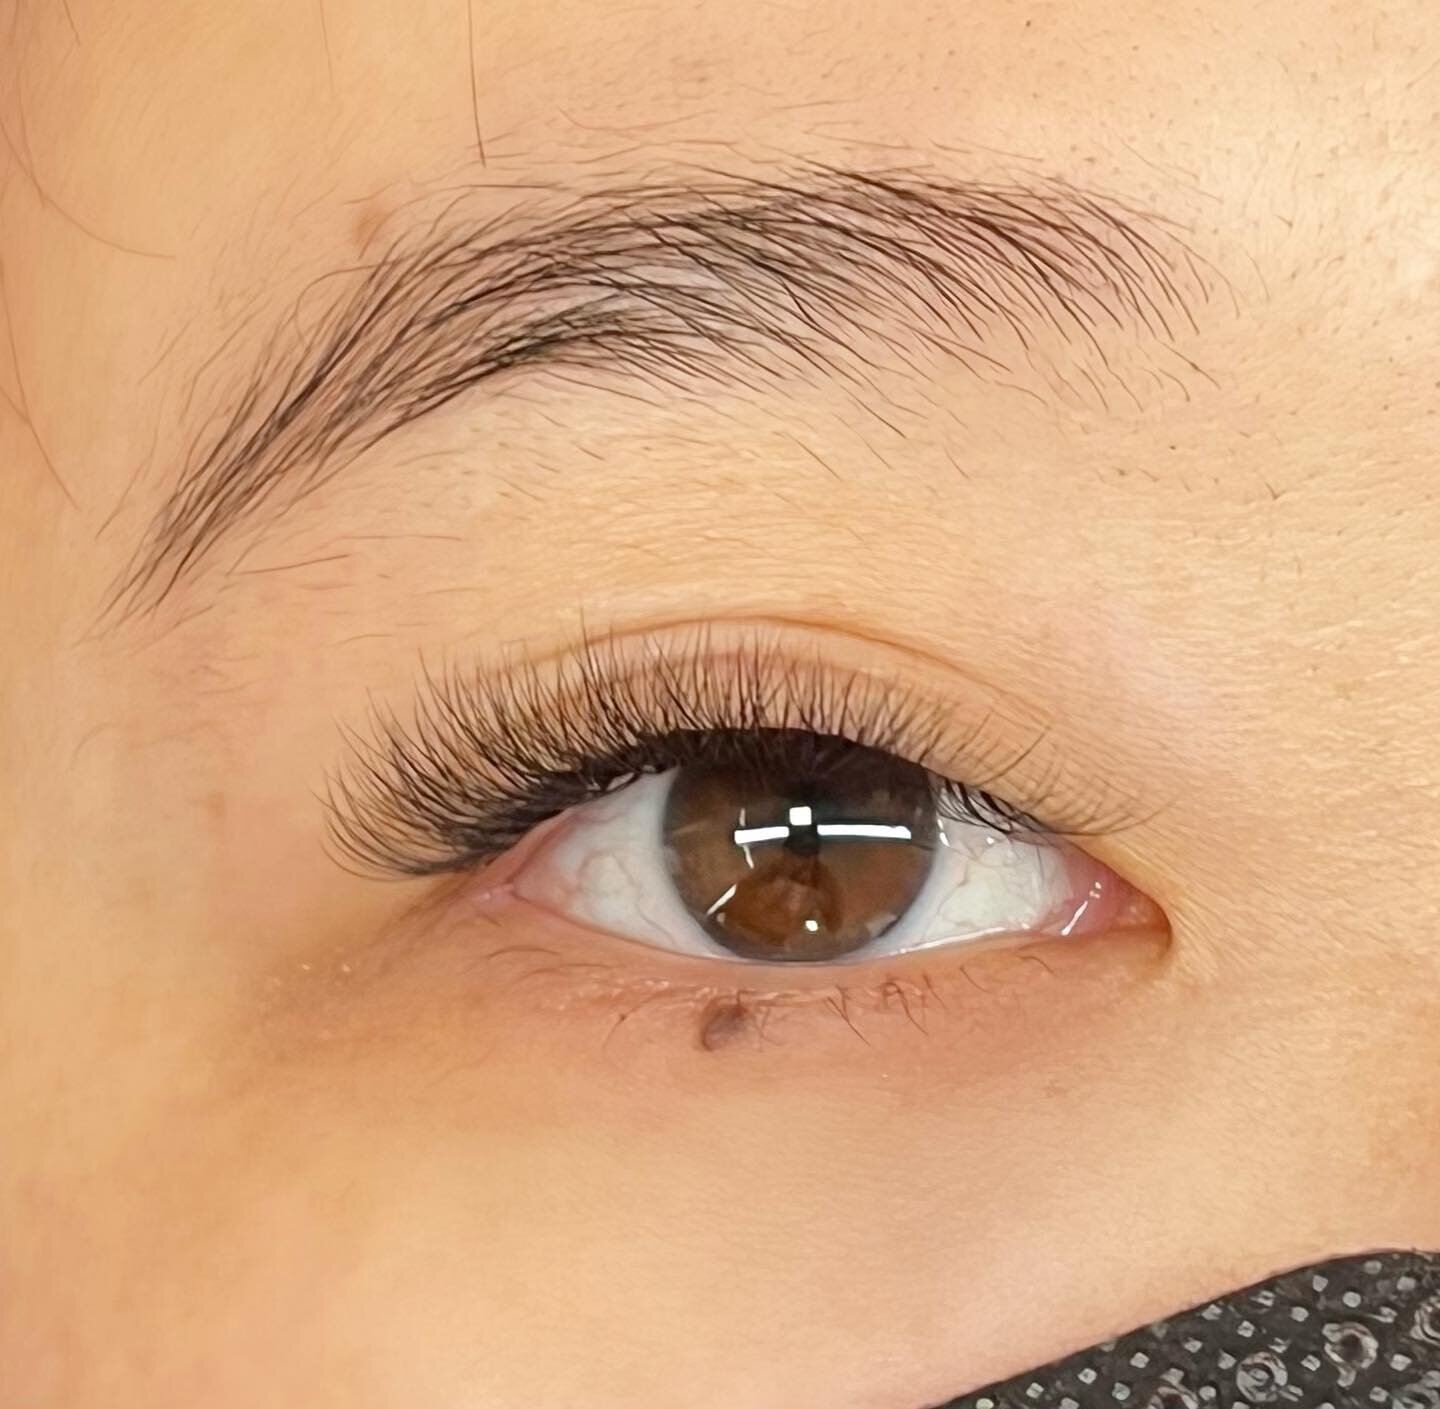 I often get asked if you can do lash extensions if you don&rsquo;t really have any lashes to begin with&hellip; OF COURSE. 🤍

This beautiful client started with very little natural lashes and we added some gorgeous, subtle extensions to give her eye